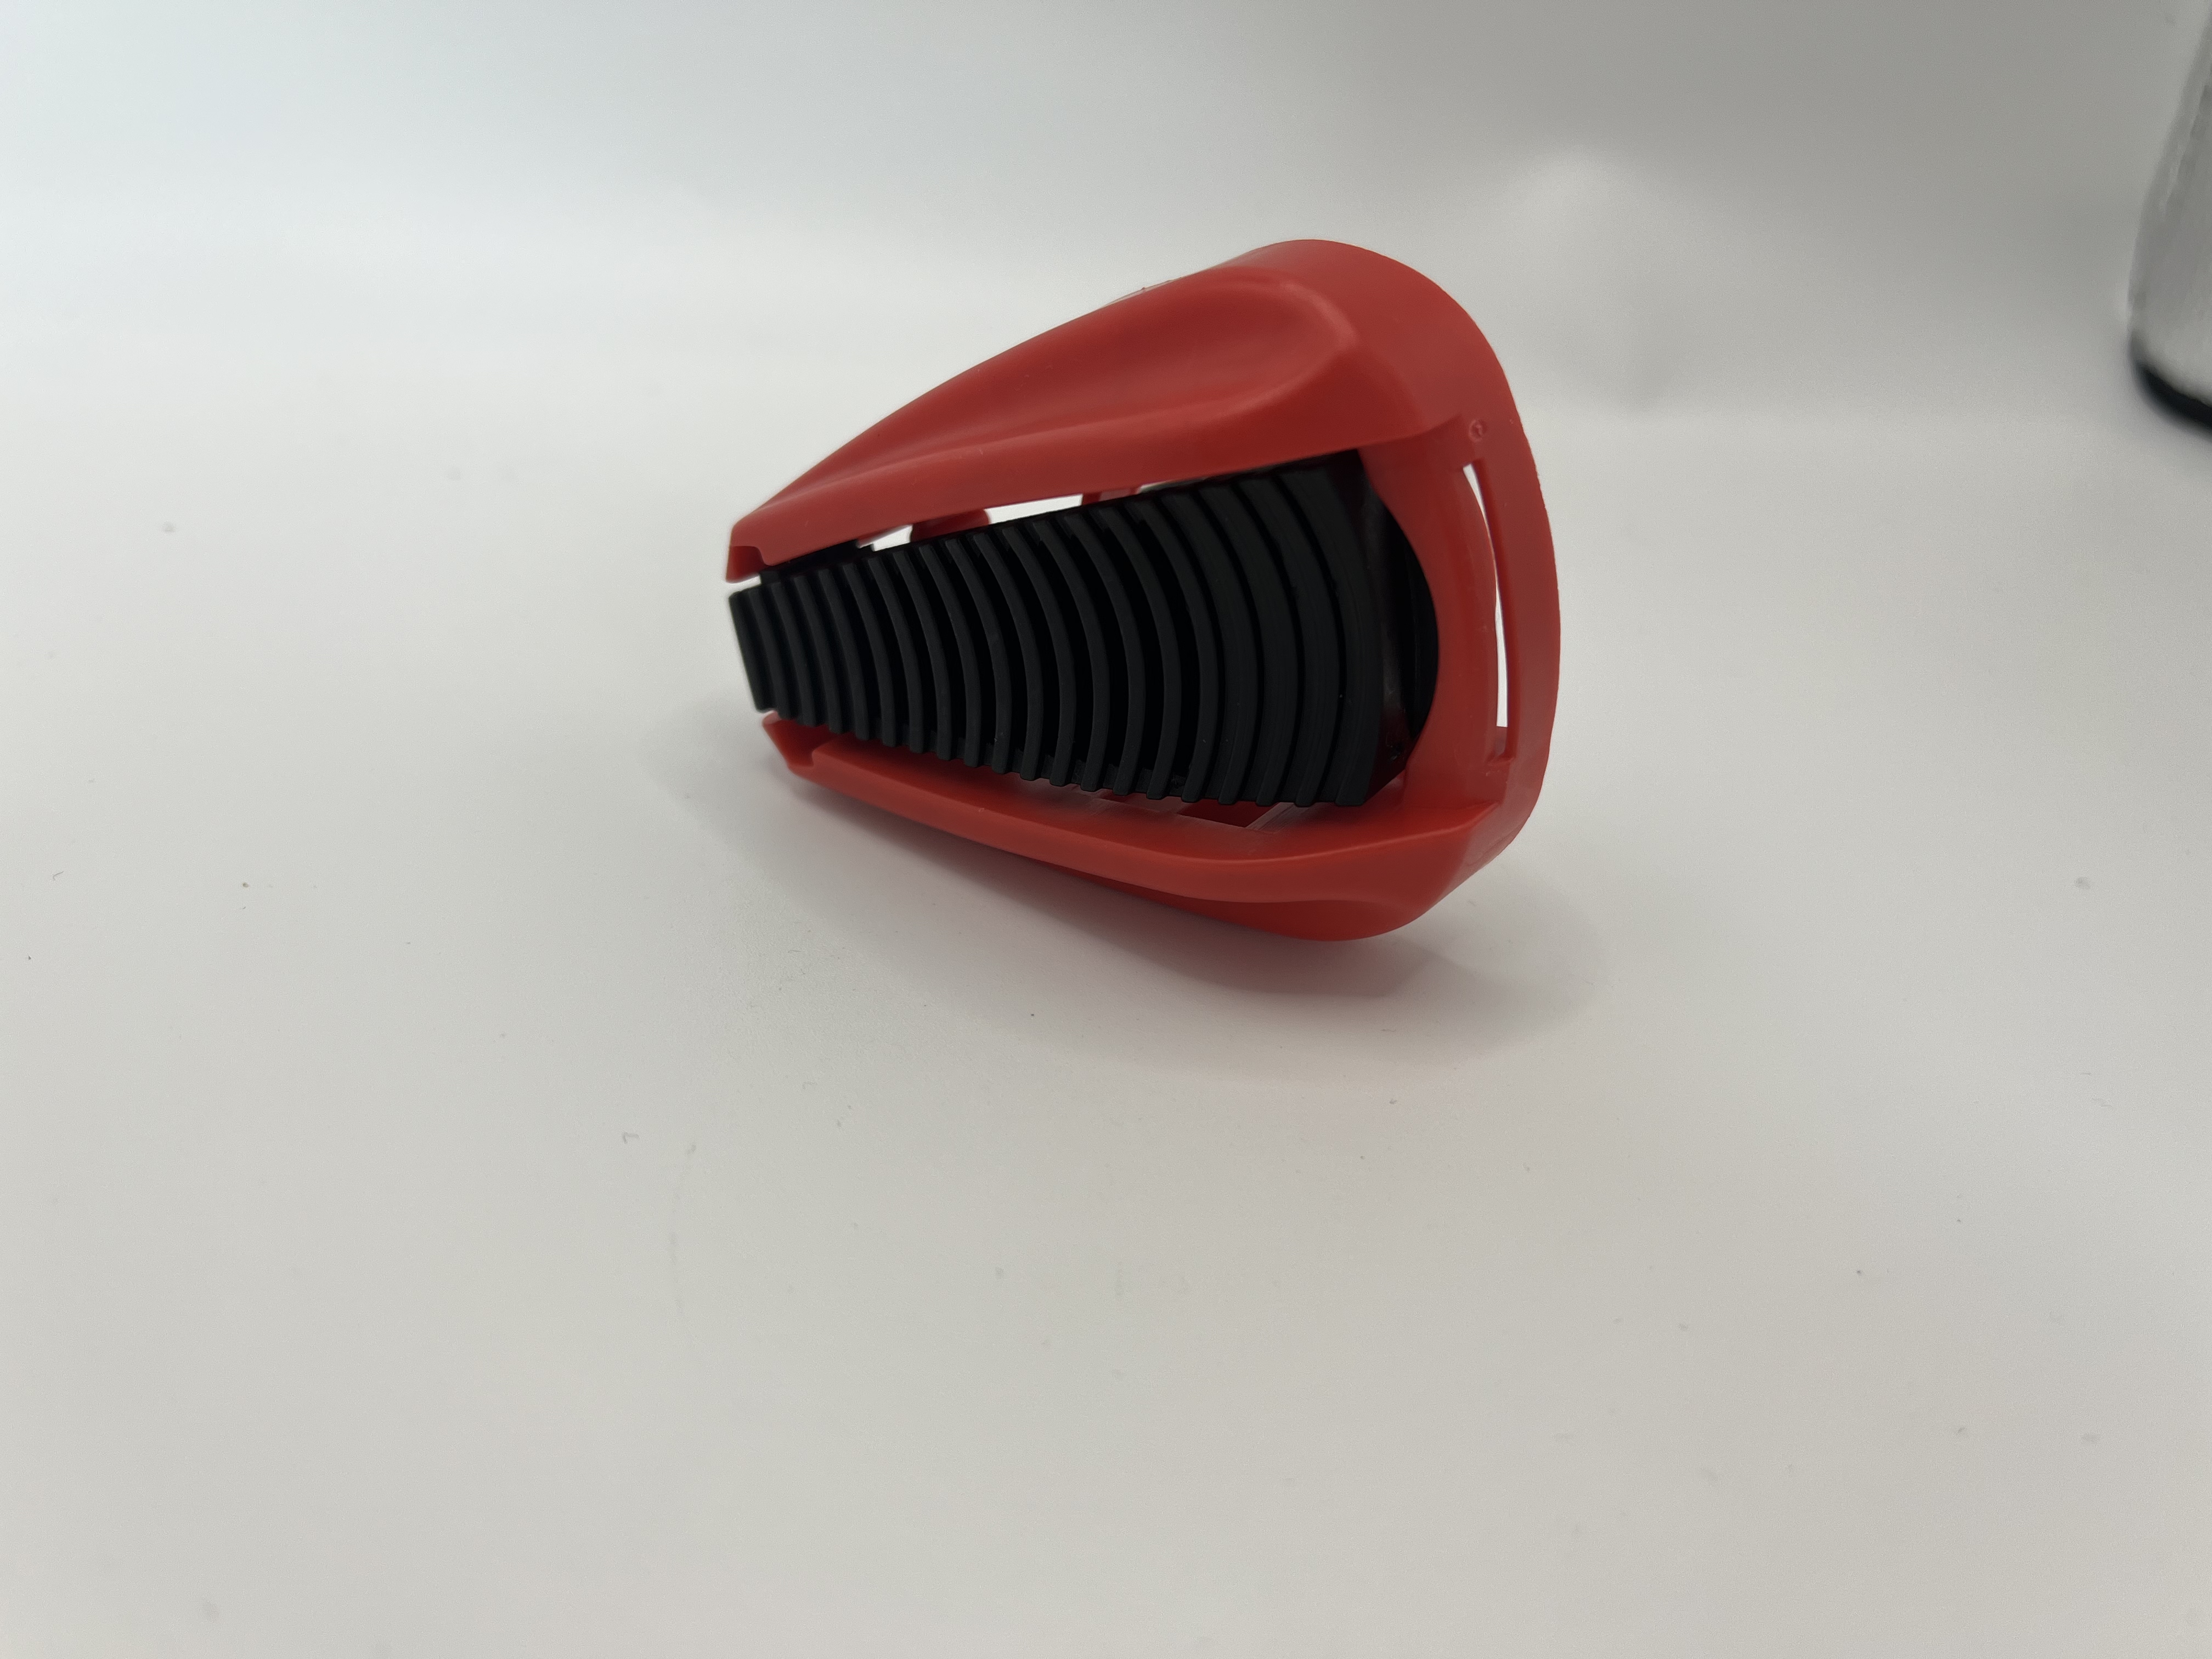 High-Pressure Aerosol Spray Nozzle for Automotive Cleaning - Versatile Cleaning Tool